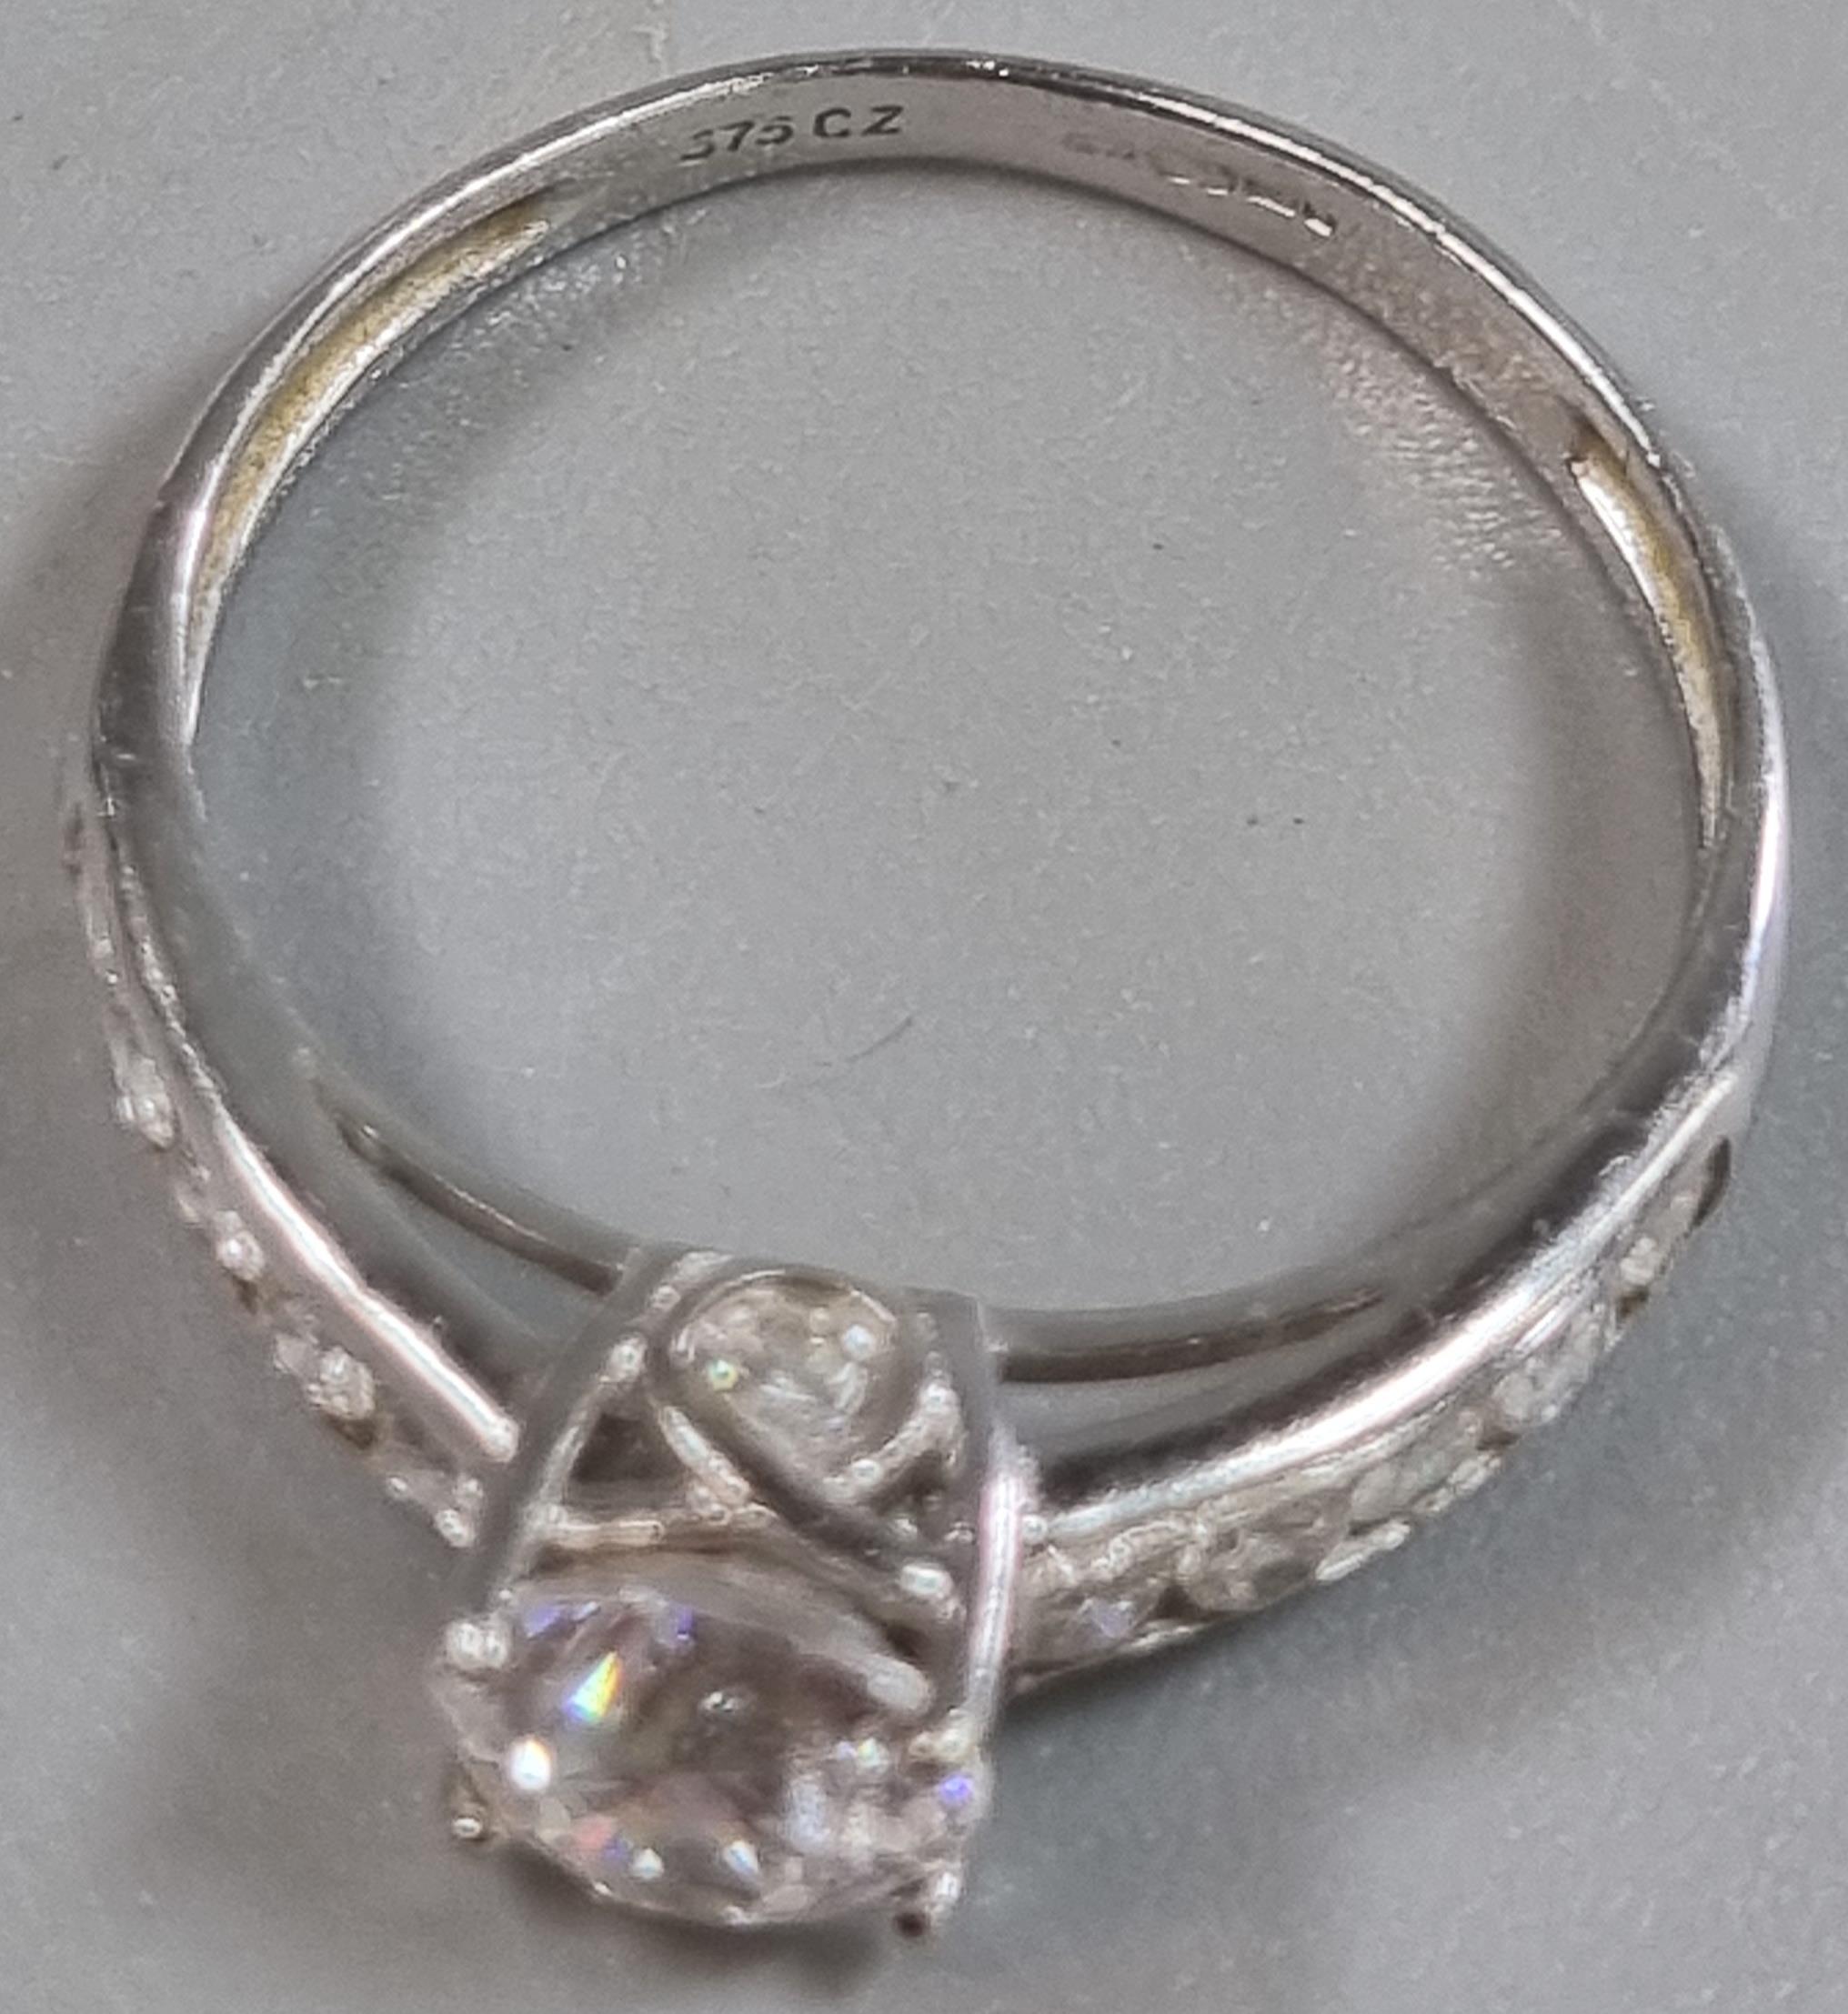 9ct white gold and cubic zirconia solitaire style ring. 2g approx. Size M1/2. (B.P. 21% + VAT) - Image 3 of 3